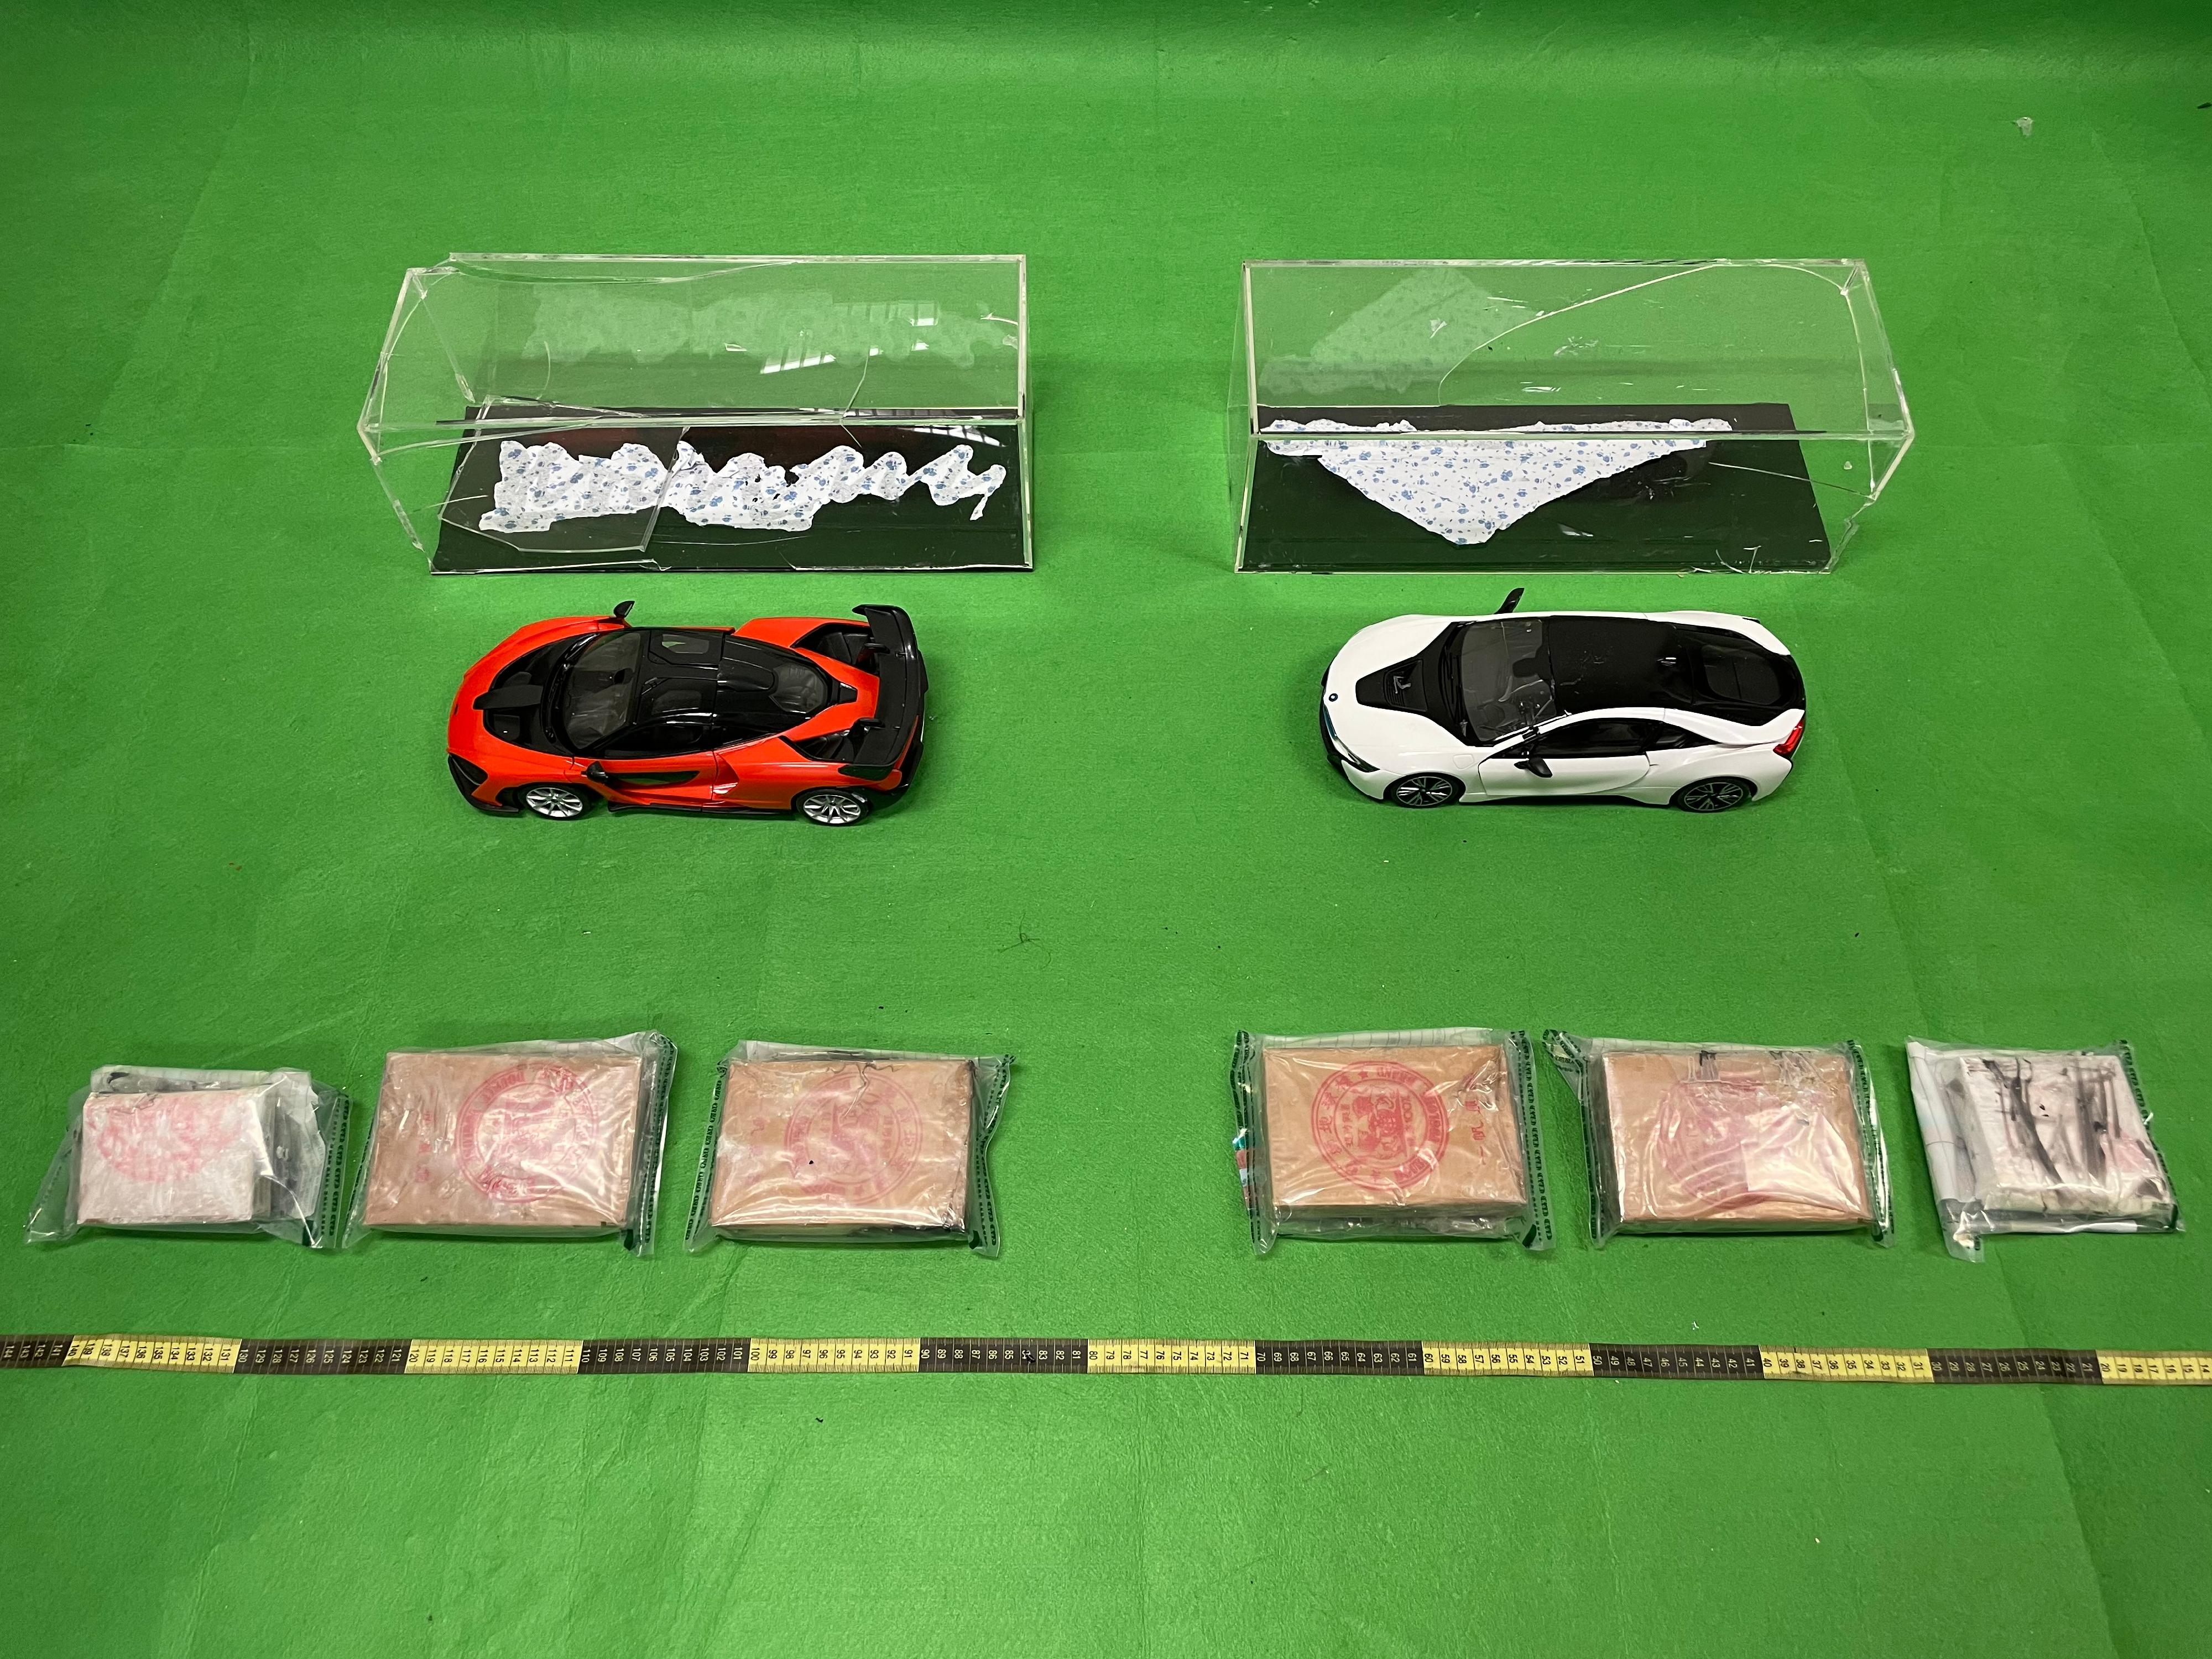 Hong Kong Customs seized about 3.5 kilograms of suspected heroin with an estimated market value of about $4.6 million at Hong Kong International Airport on January 12 and 13. Photo shows the suspected heroin seized by Customs officers in one of the cases and the model car display racks used to conceal the drugs.